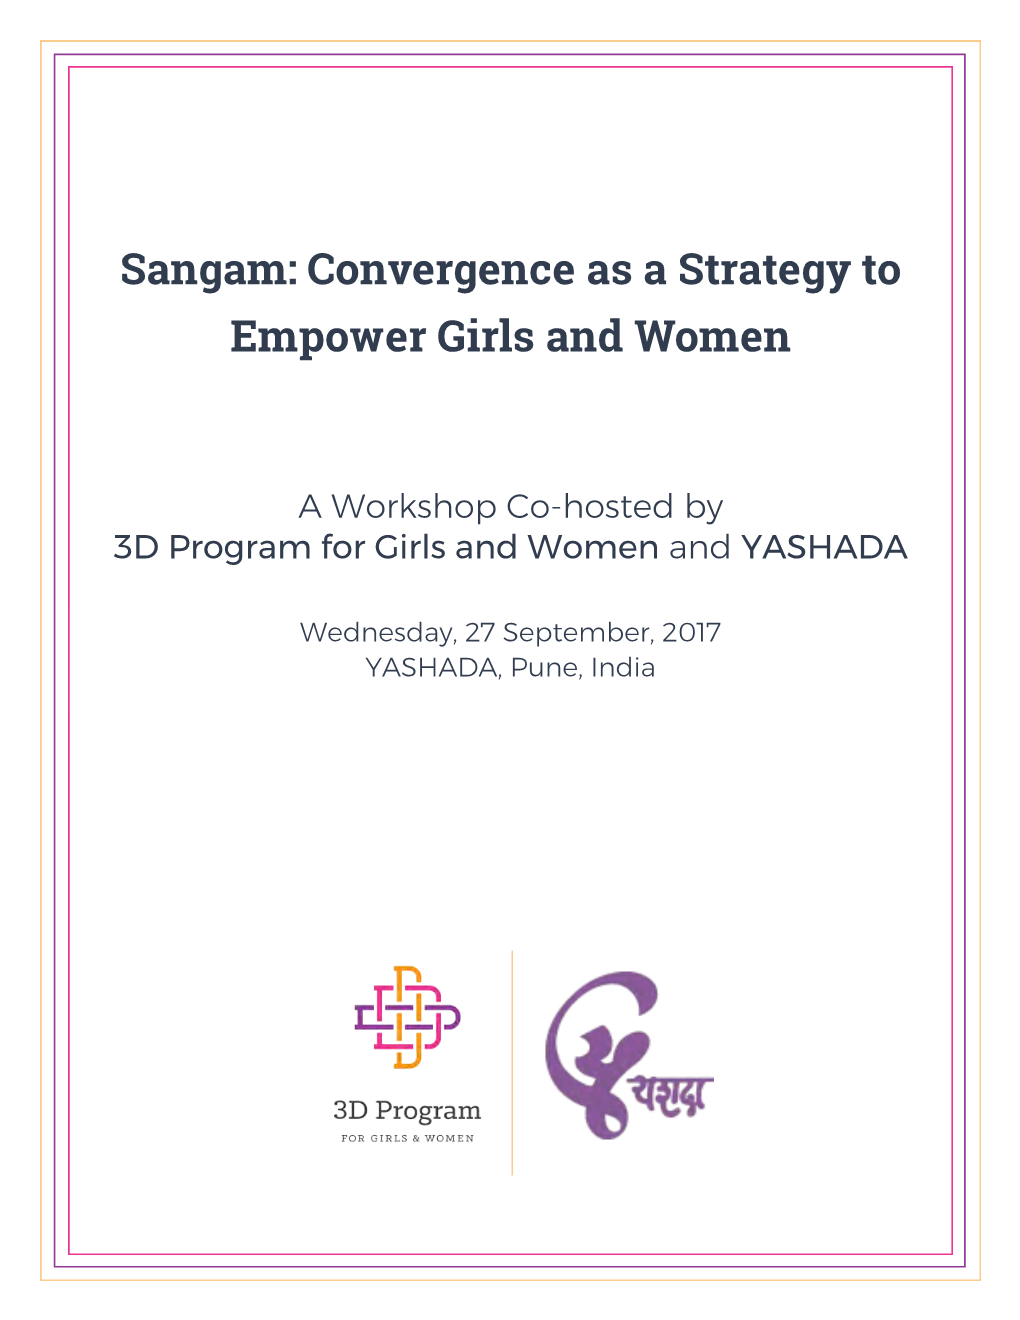 Sangam: Convergence As a Strategy to Empower Girls and Women